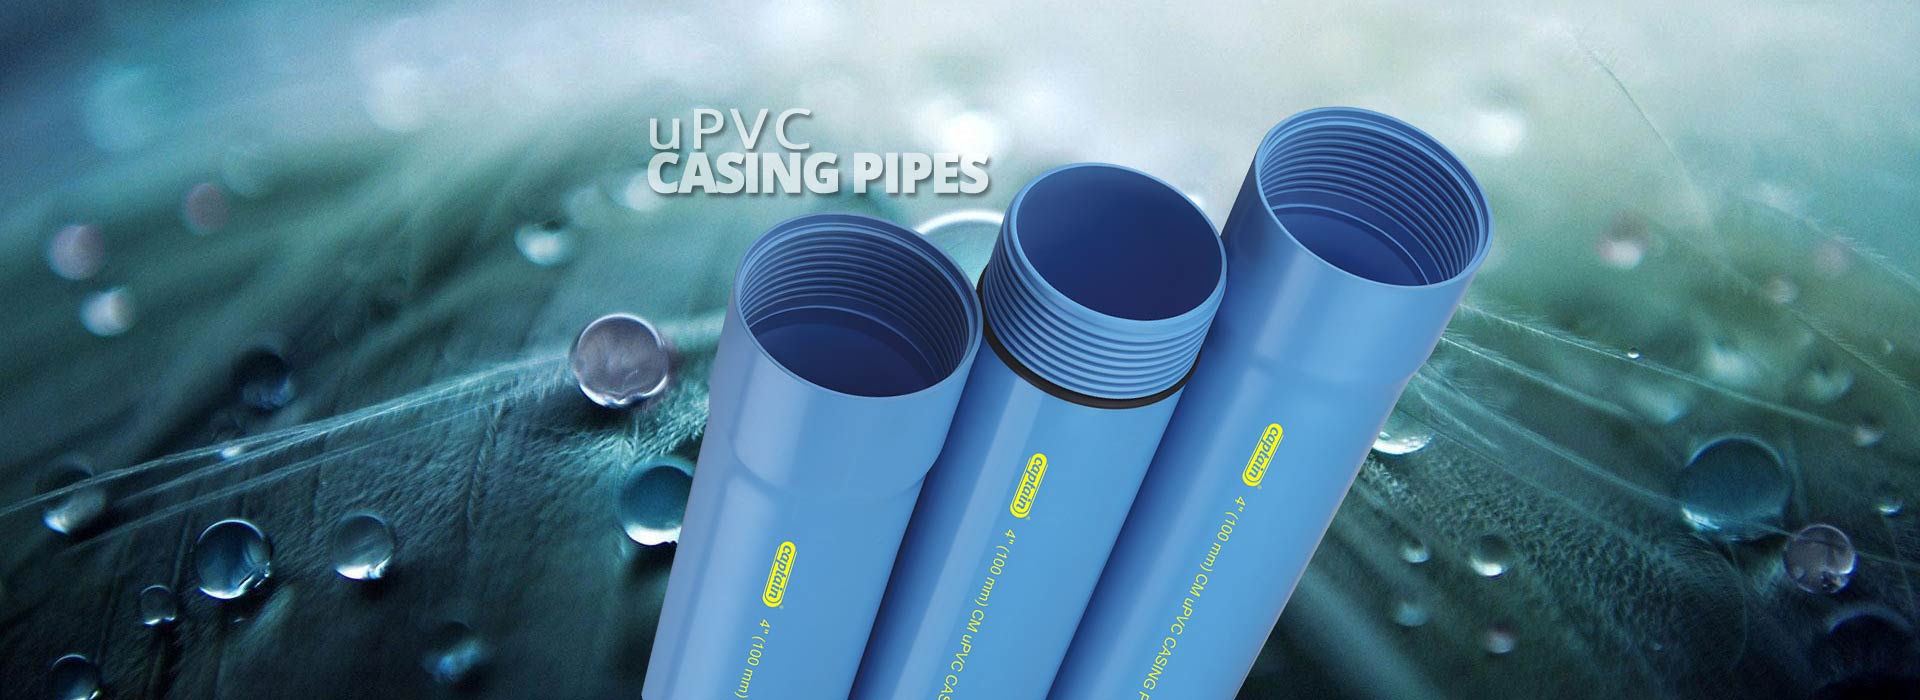 uPVC Casing Pipes from Captain Pipes Ltd.